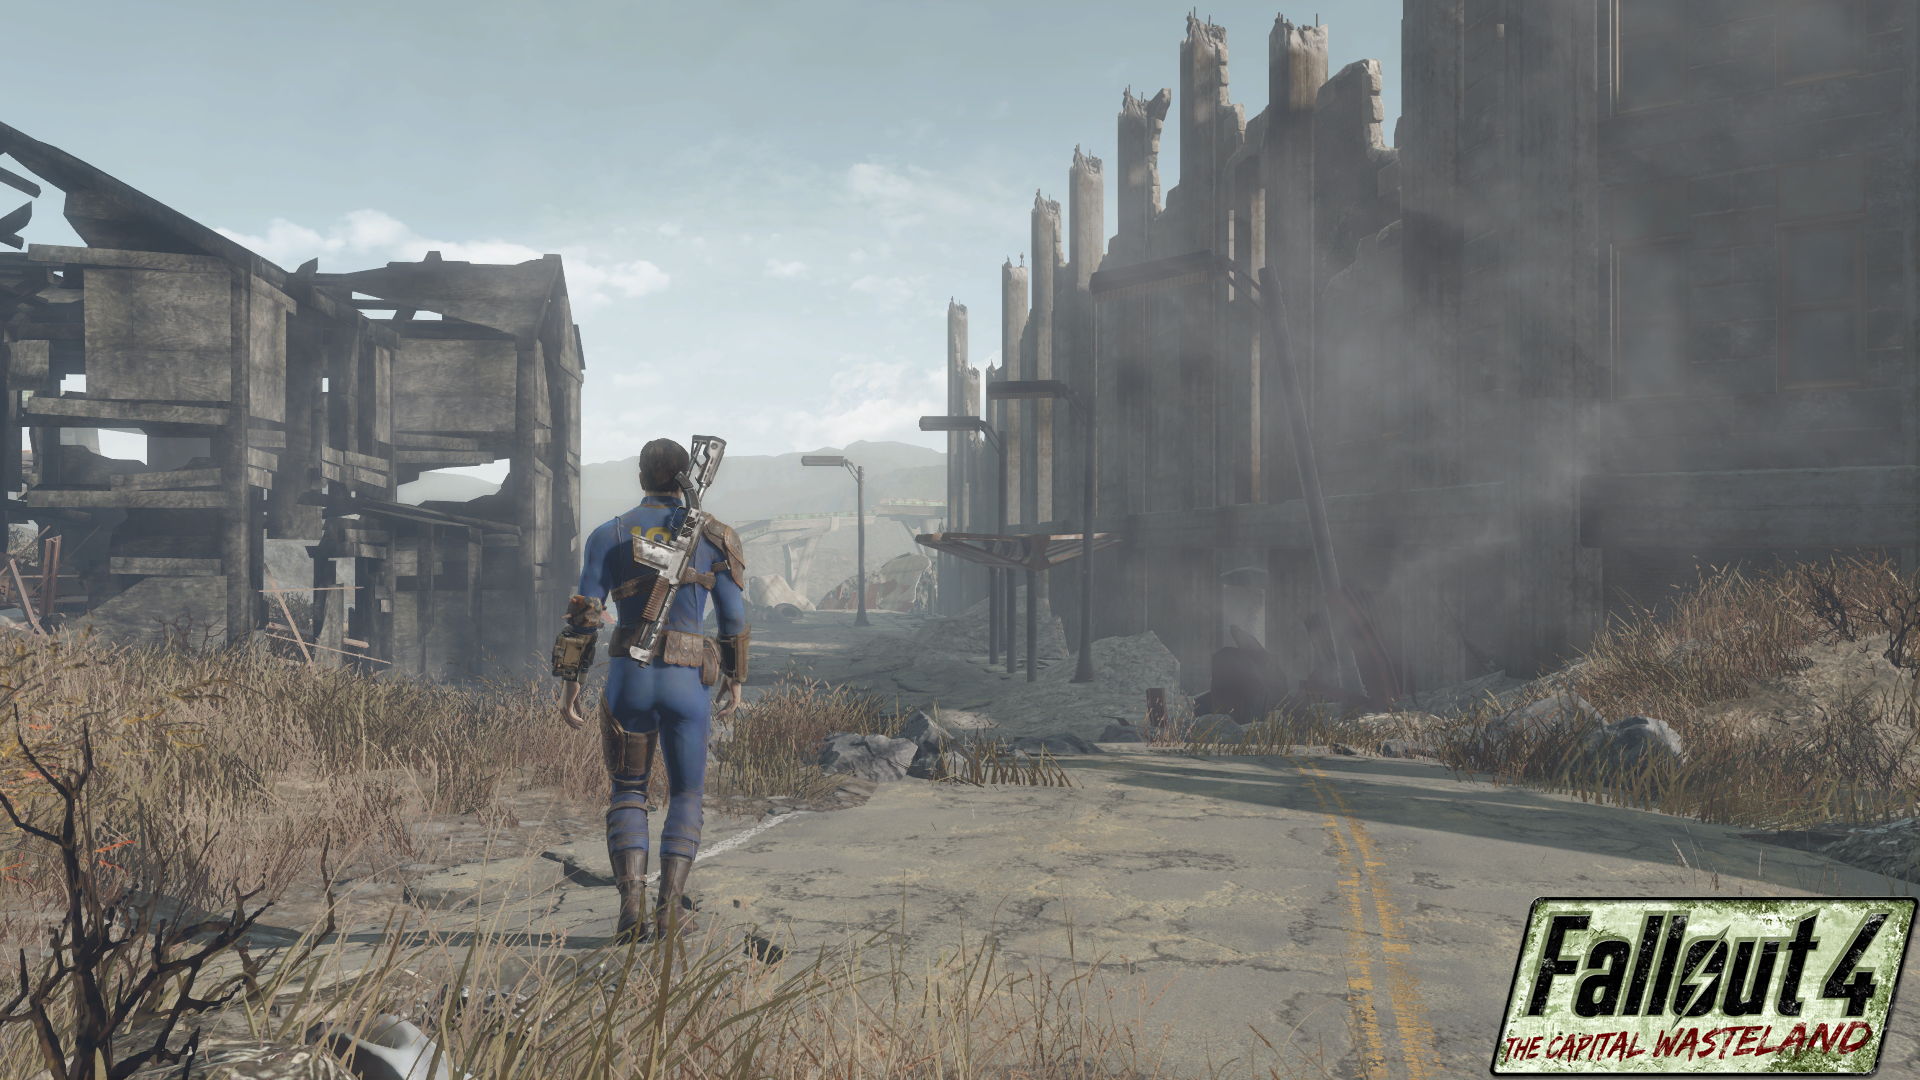 Fallout 4 capital wasteland outfit pack фото 69